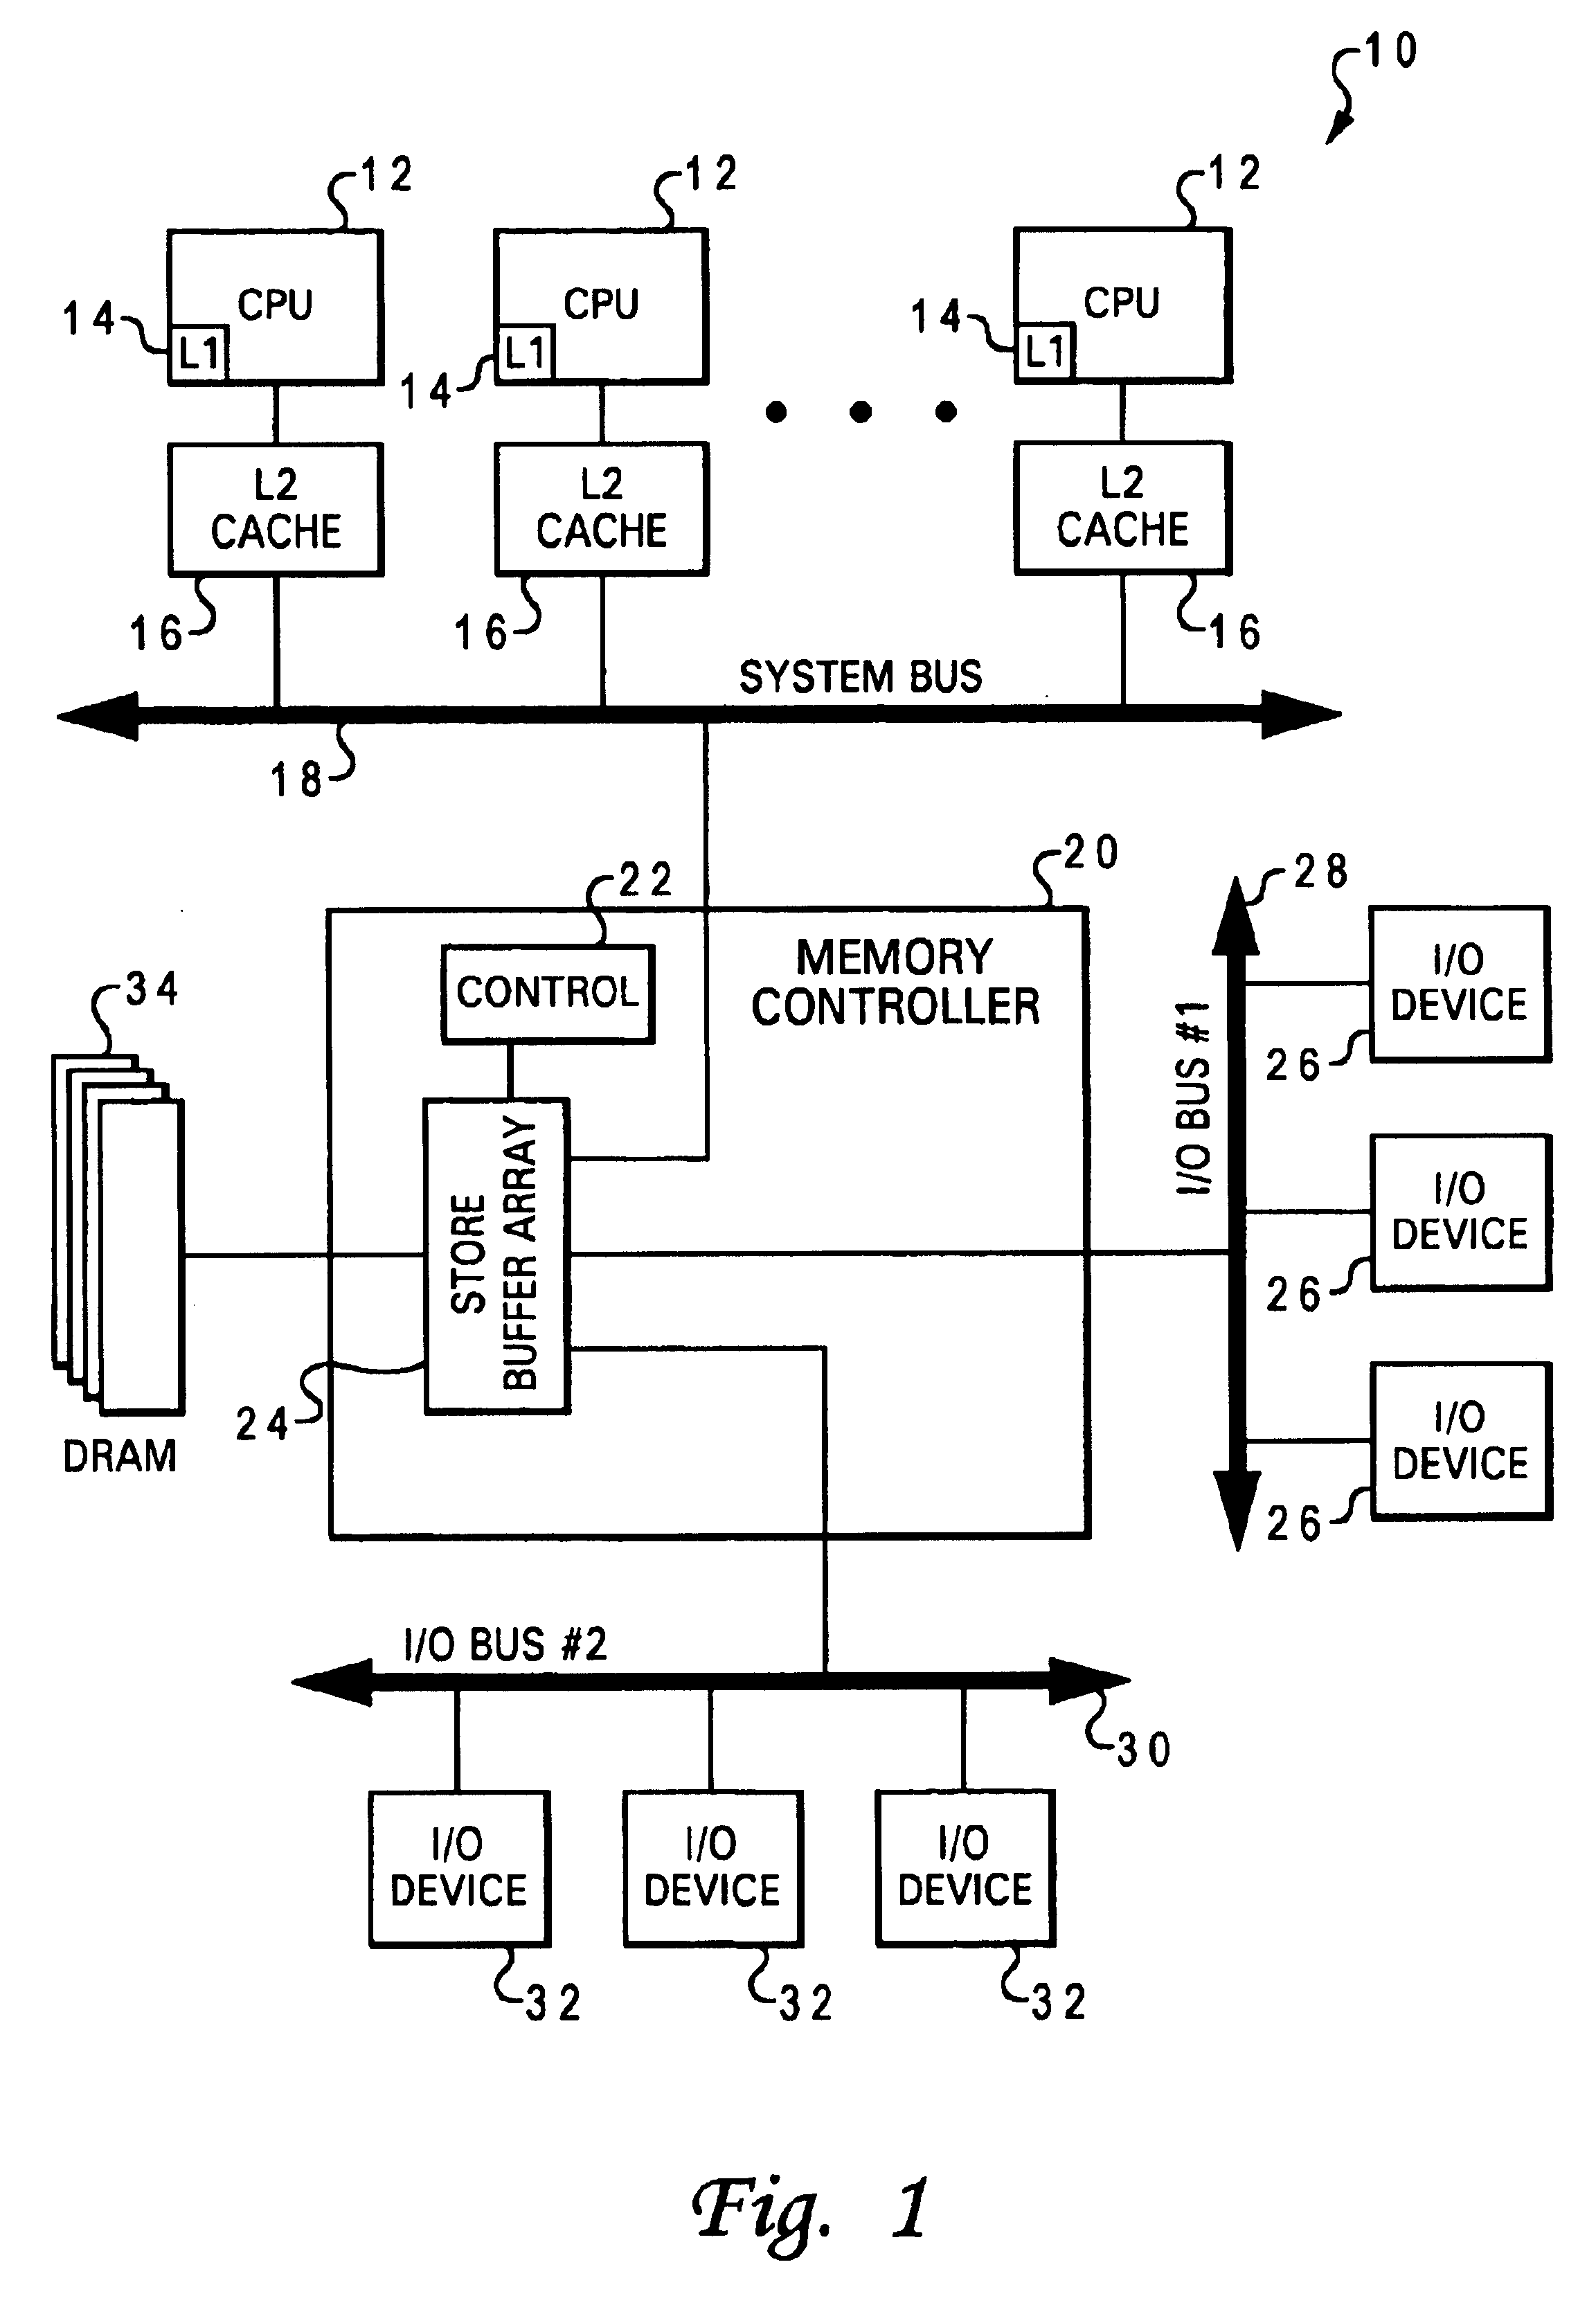 Method and apparatus for managing memory operations in a data processing system using a store buffer